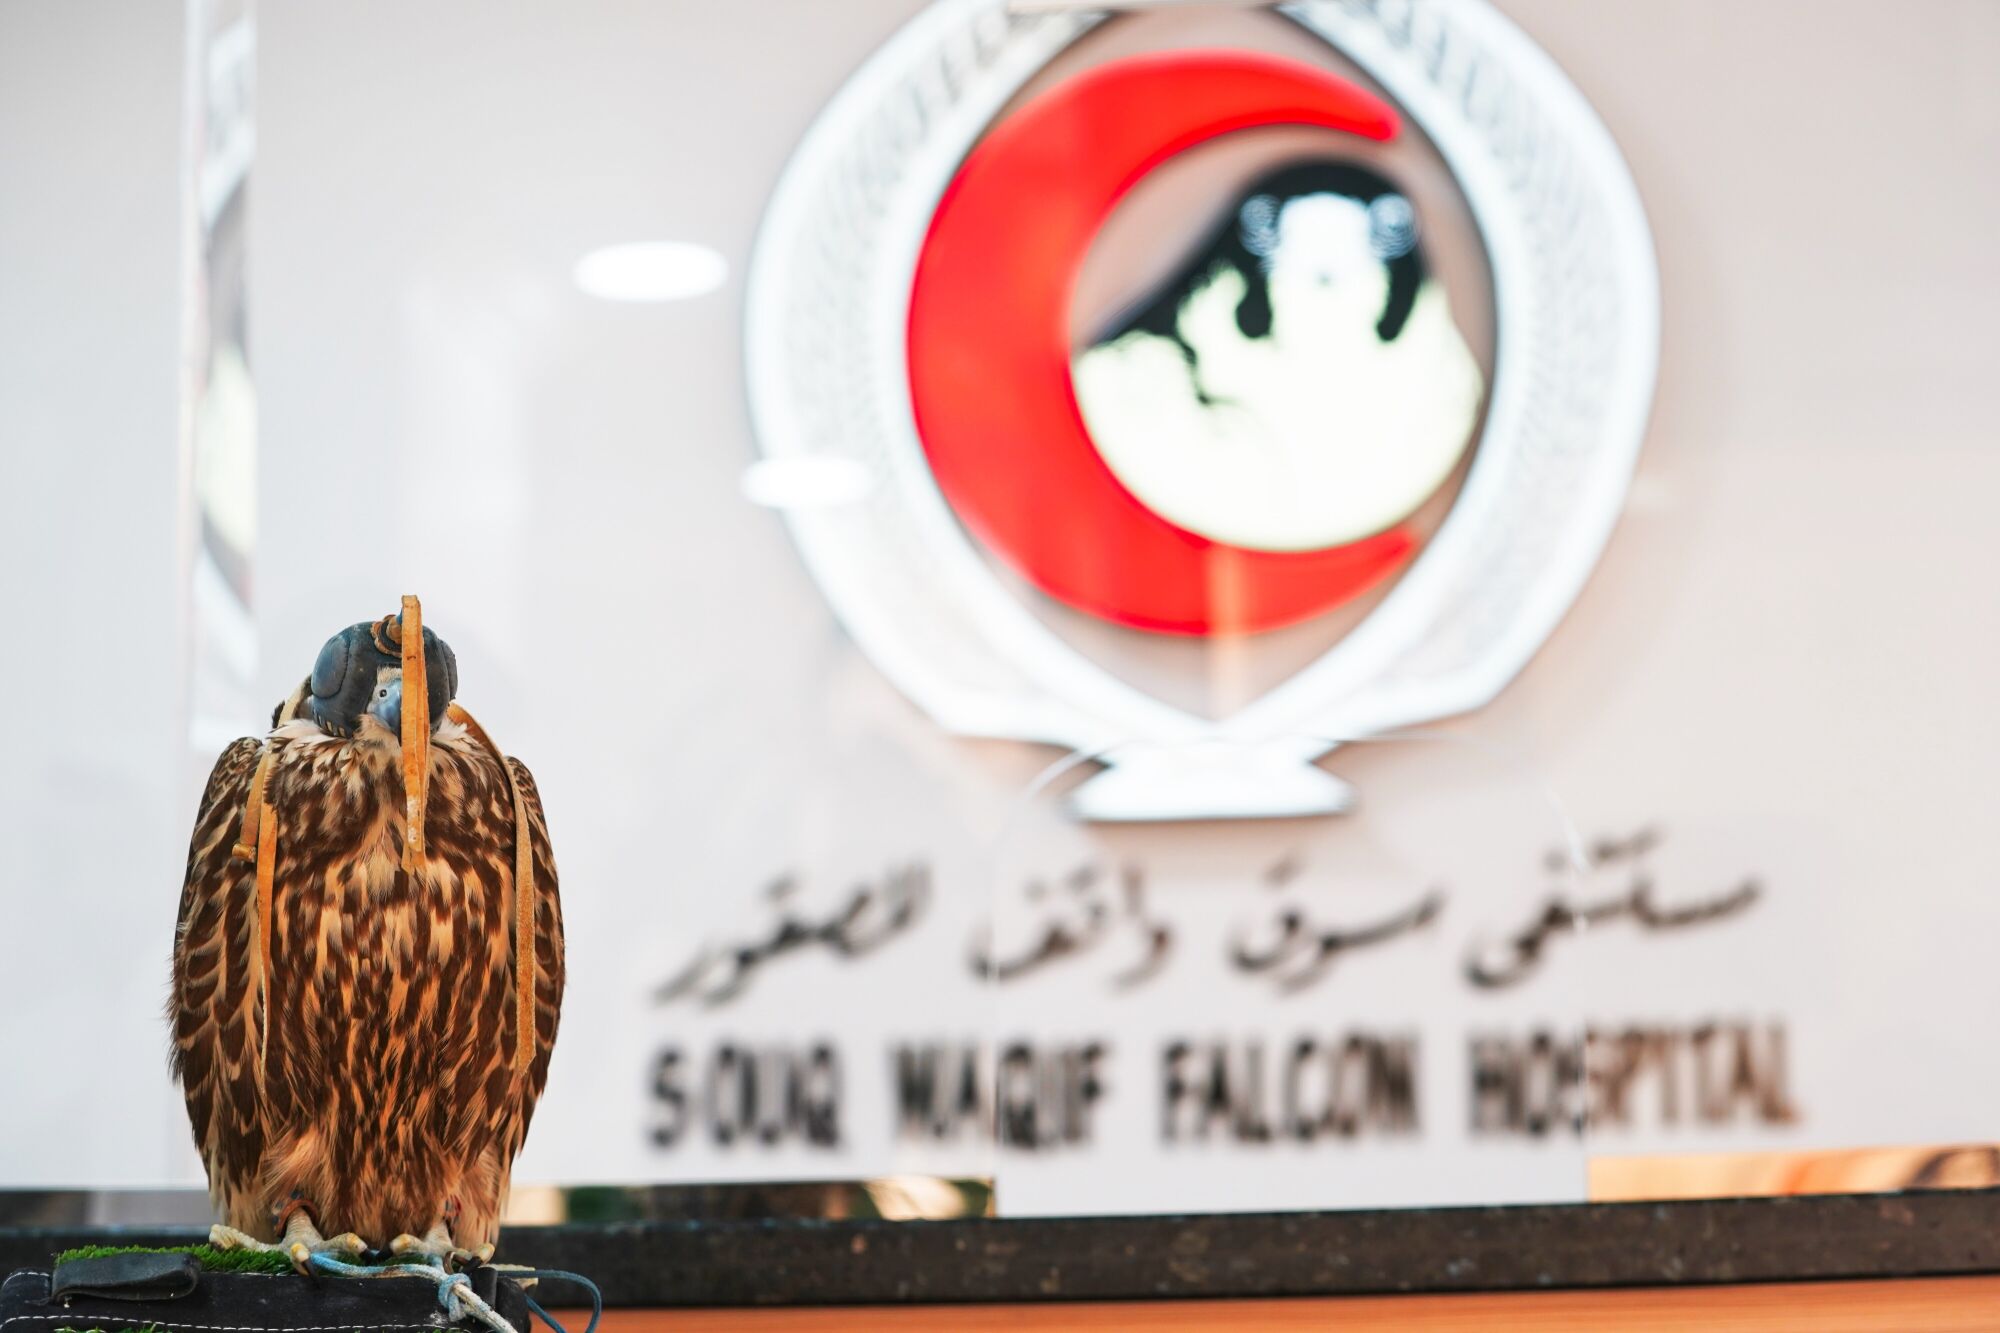 A peregrine falcon is waiting for the operation at Souq Waqif Falcon Hospital.